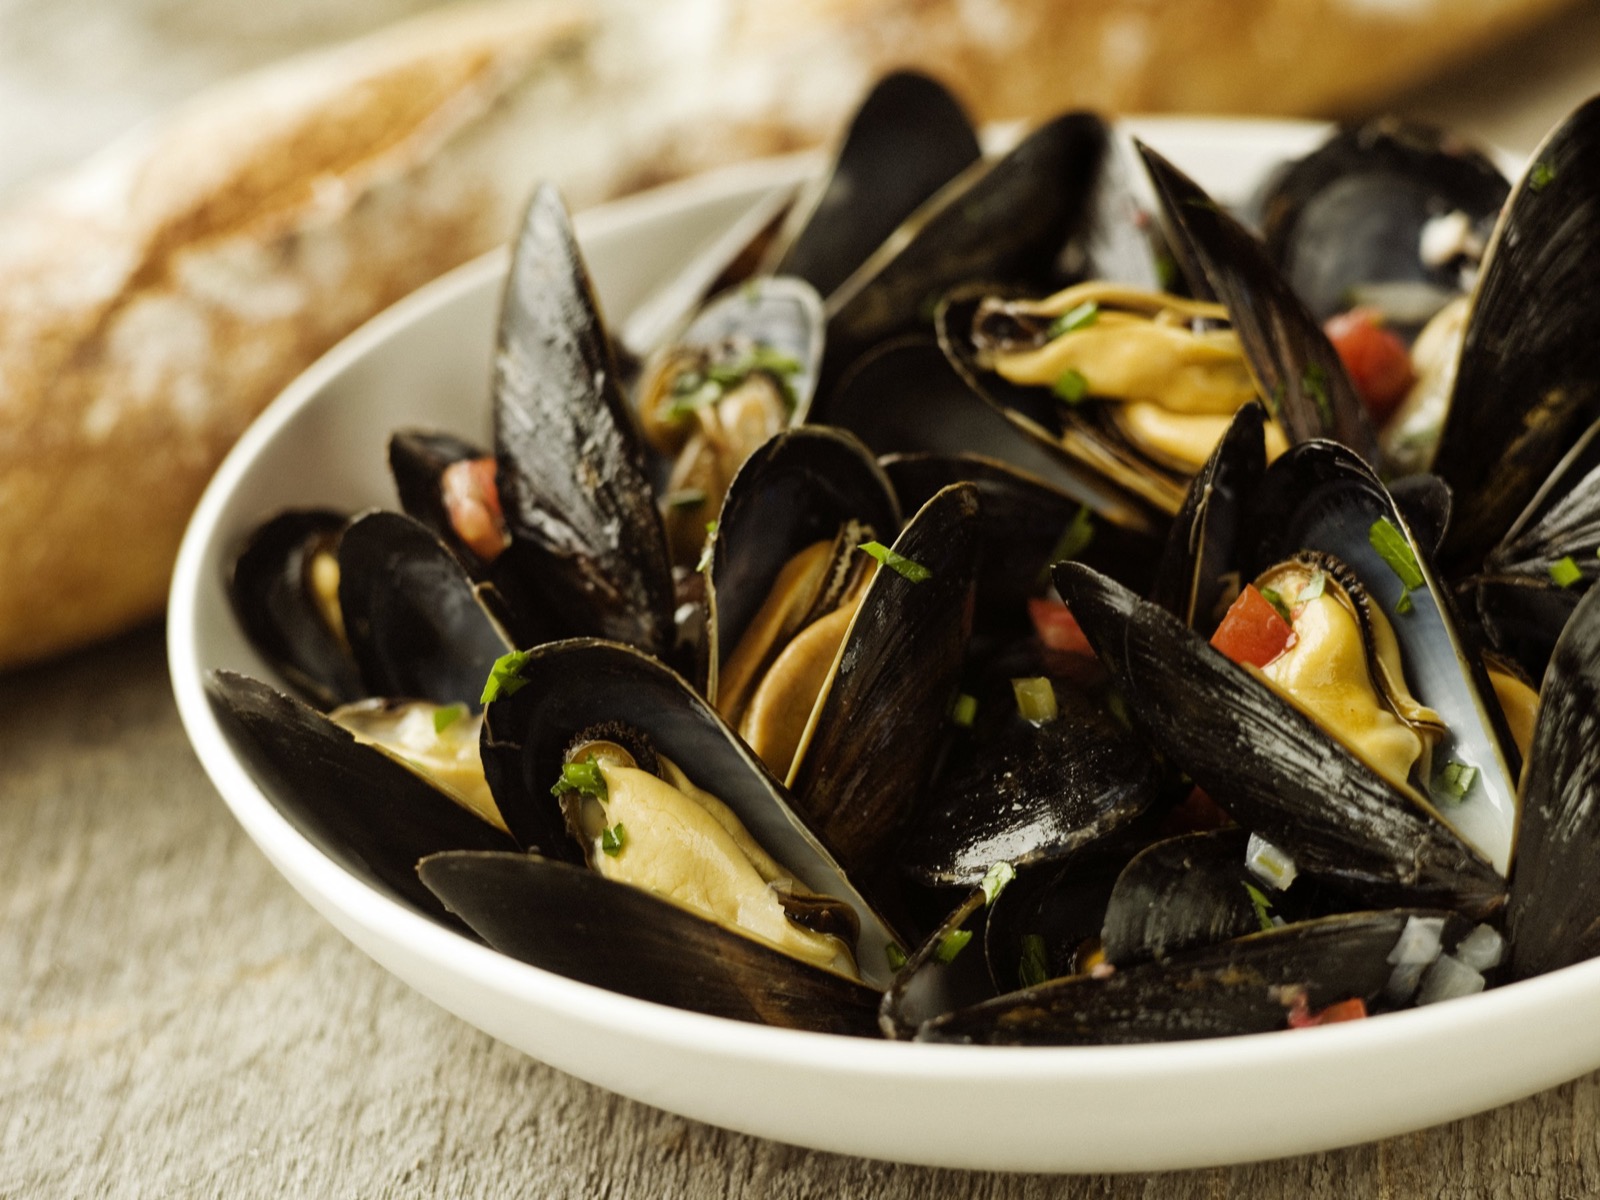 We Know Your Exact Age Based on How You Rate These Polarizing Foods Mussels